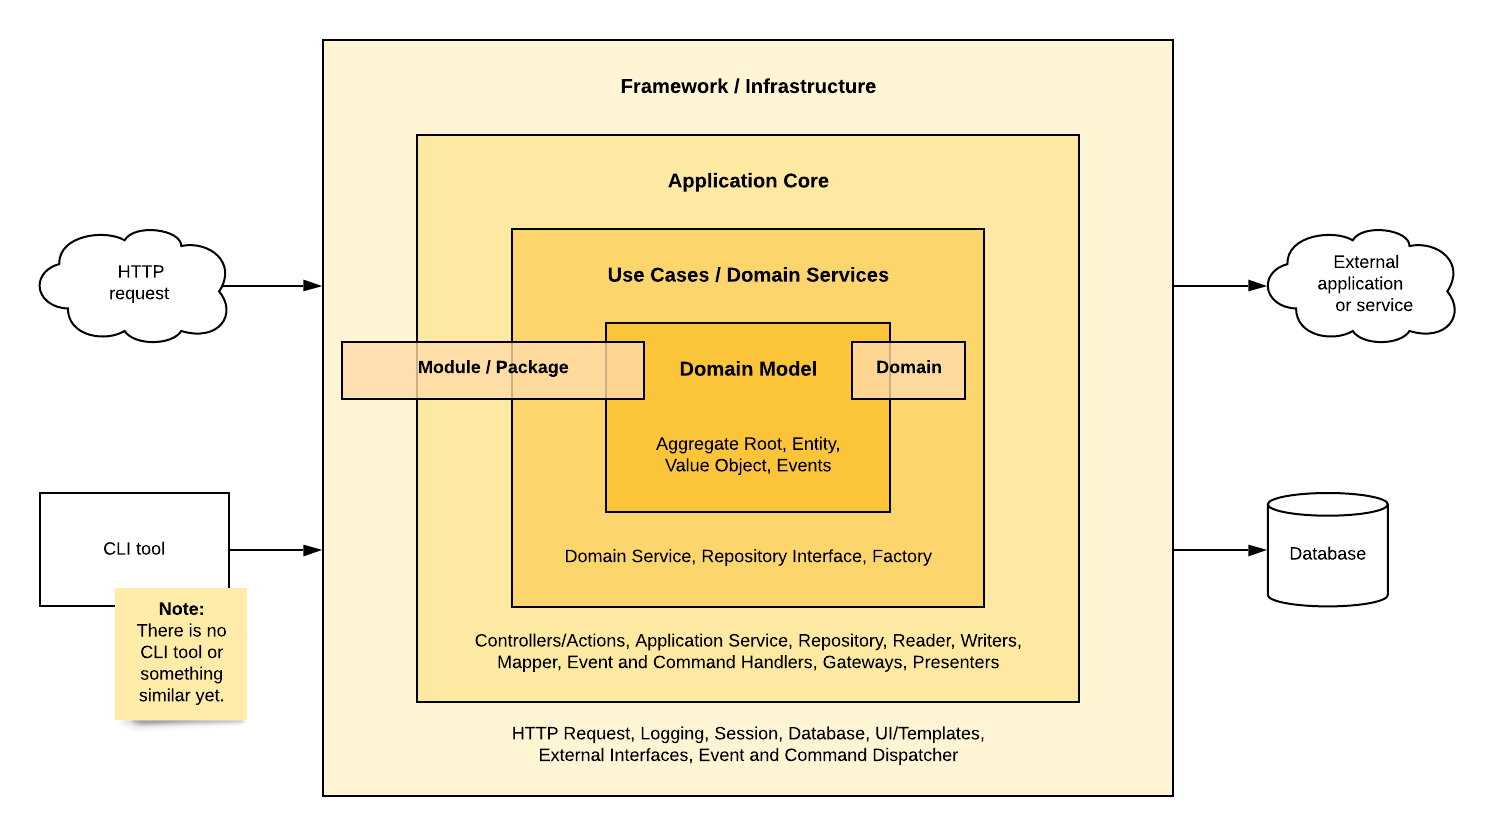 Layers of the Application Core